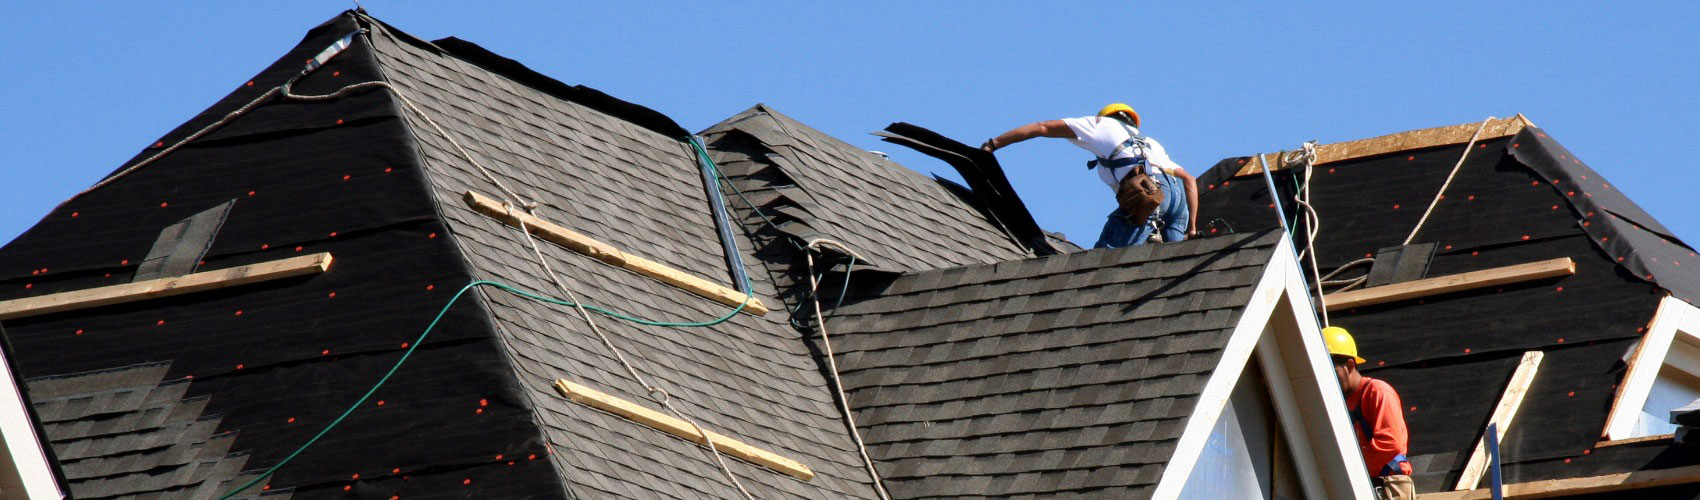 Roofing Contractor Somers Point NJ